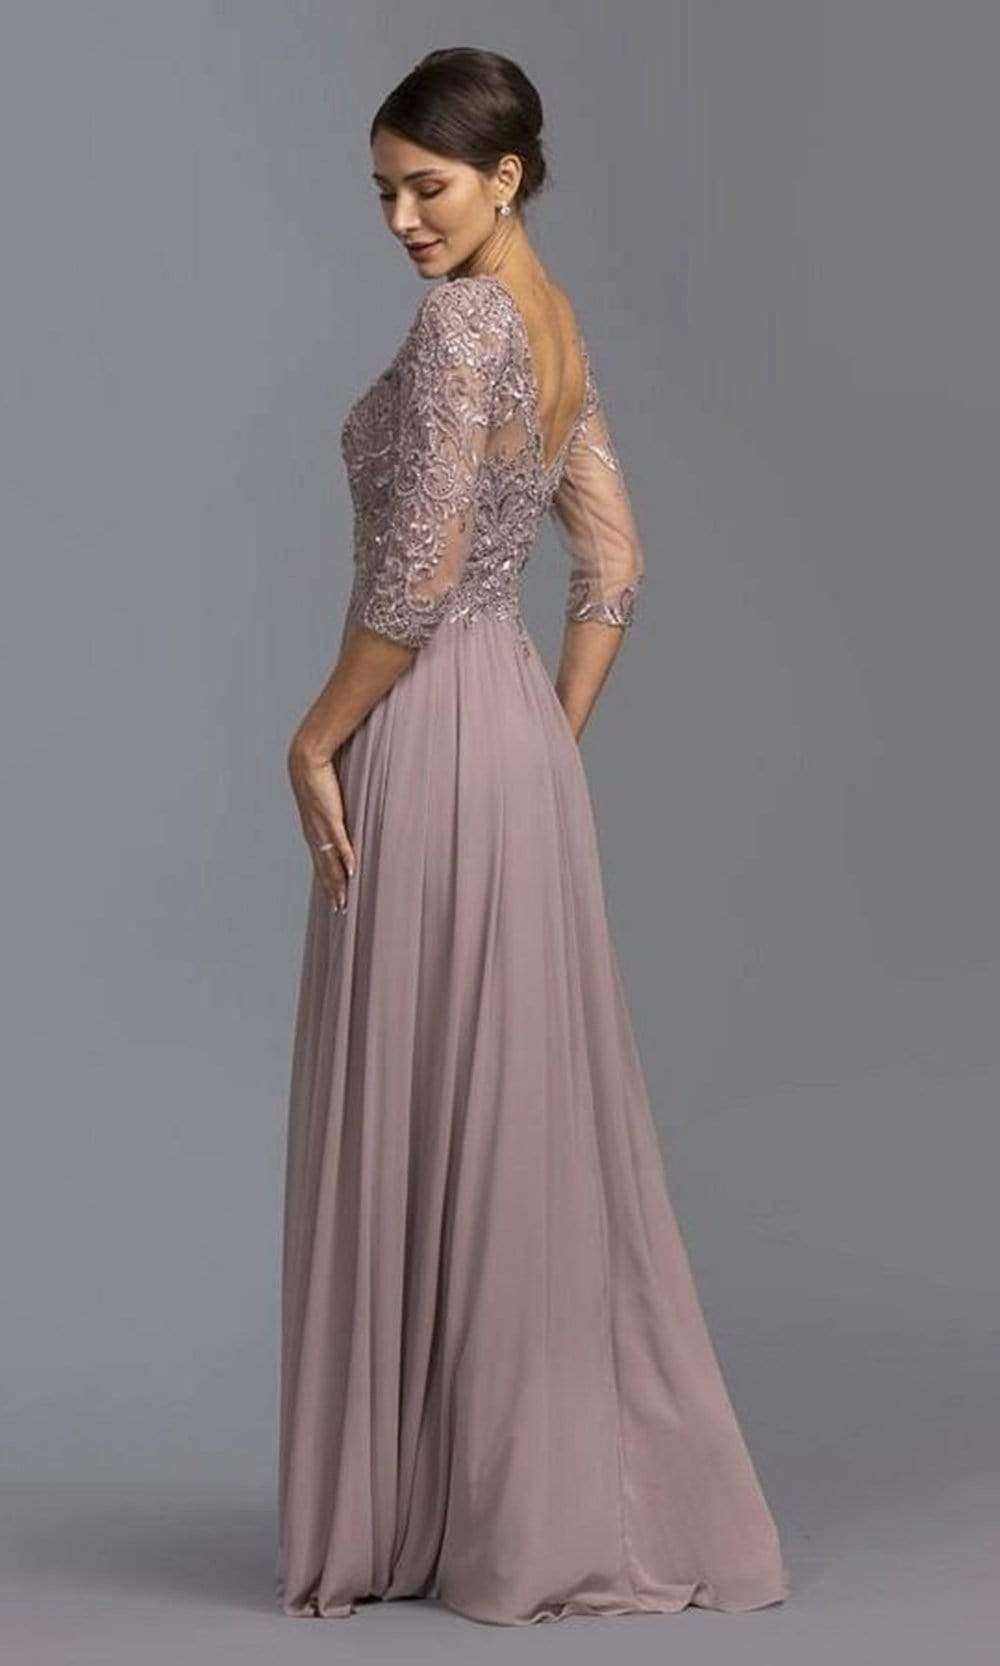 Aspeed Design - M2340 Embroidered Modest A-Line Dress Mother of the Bride Dresses